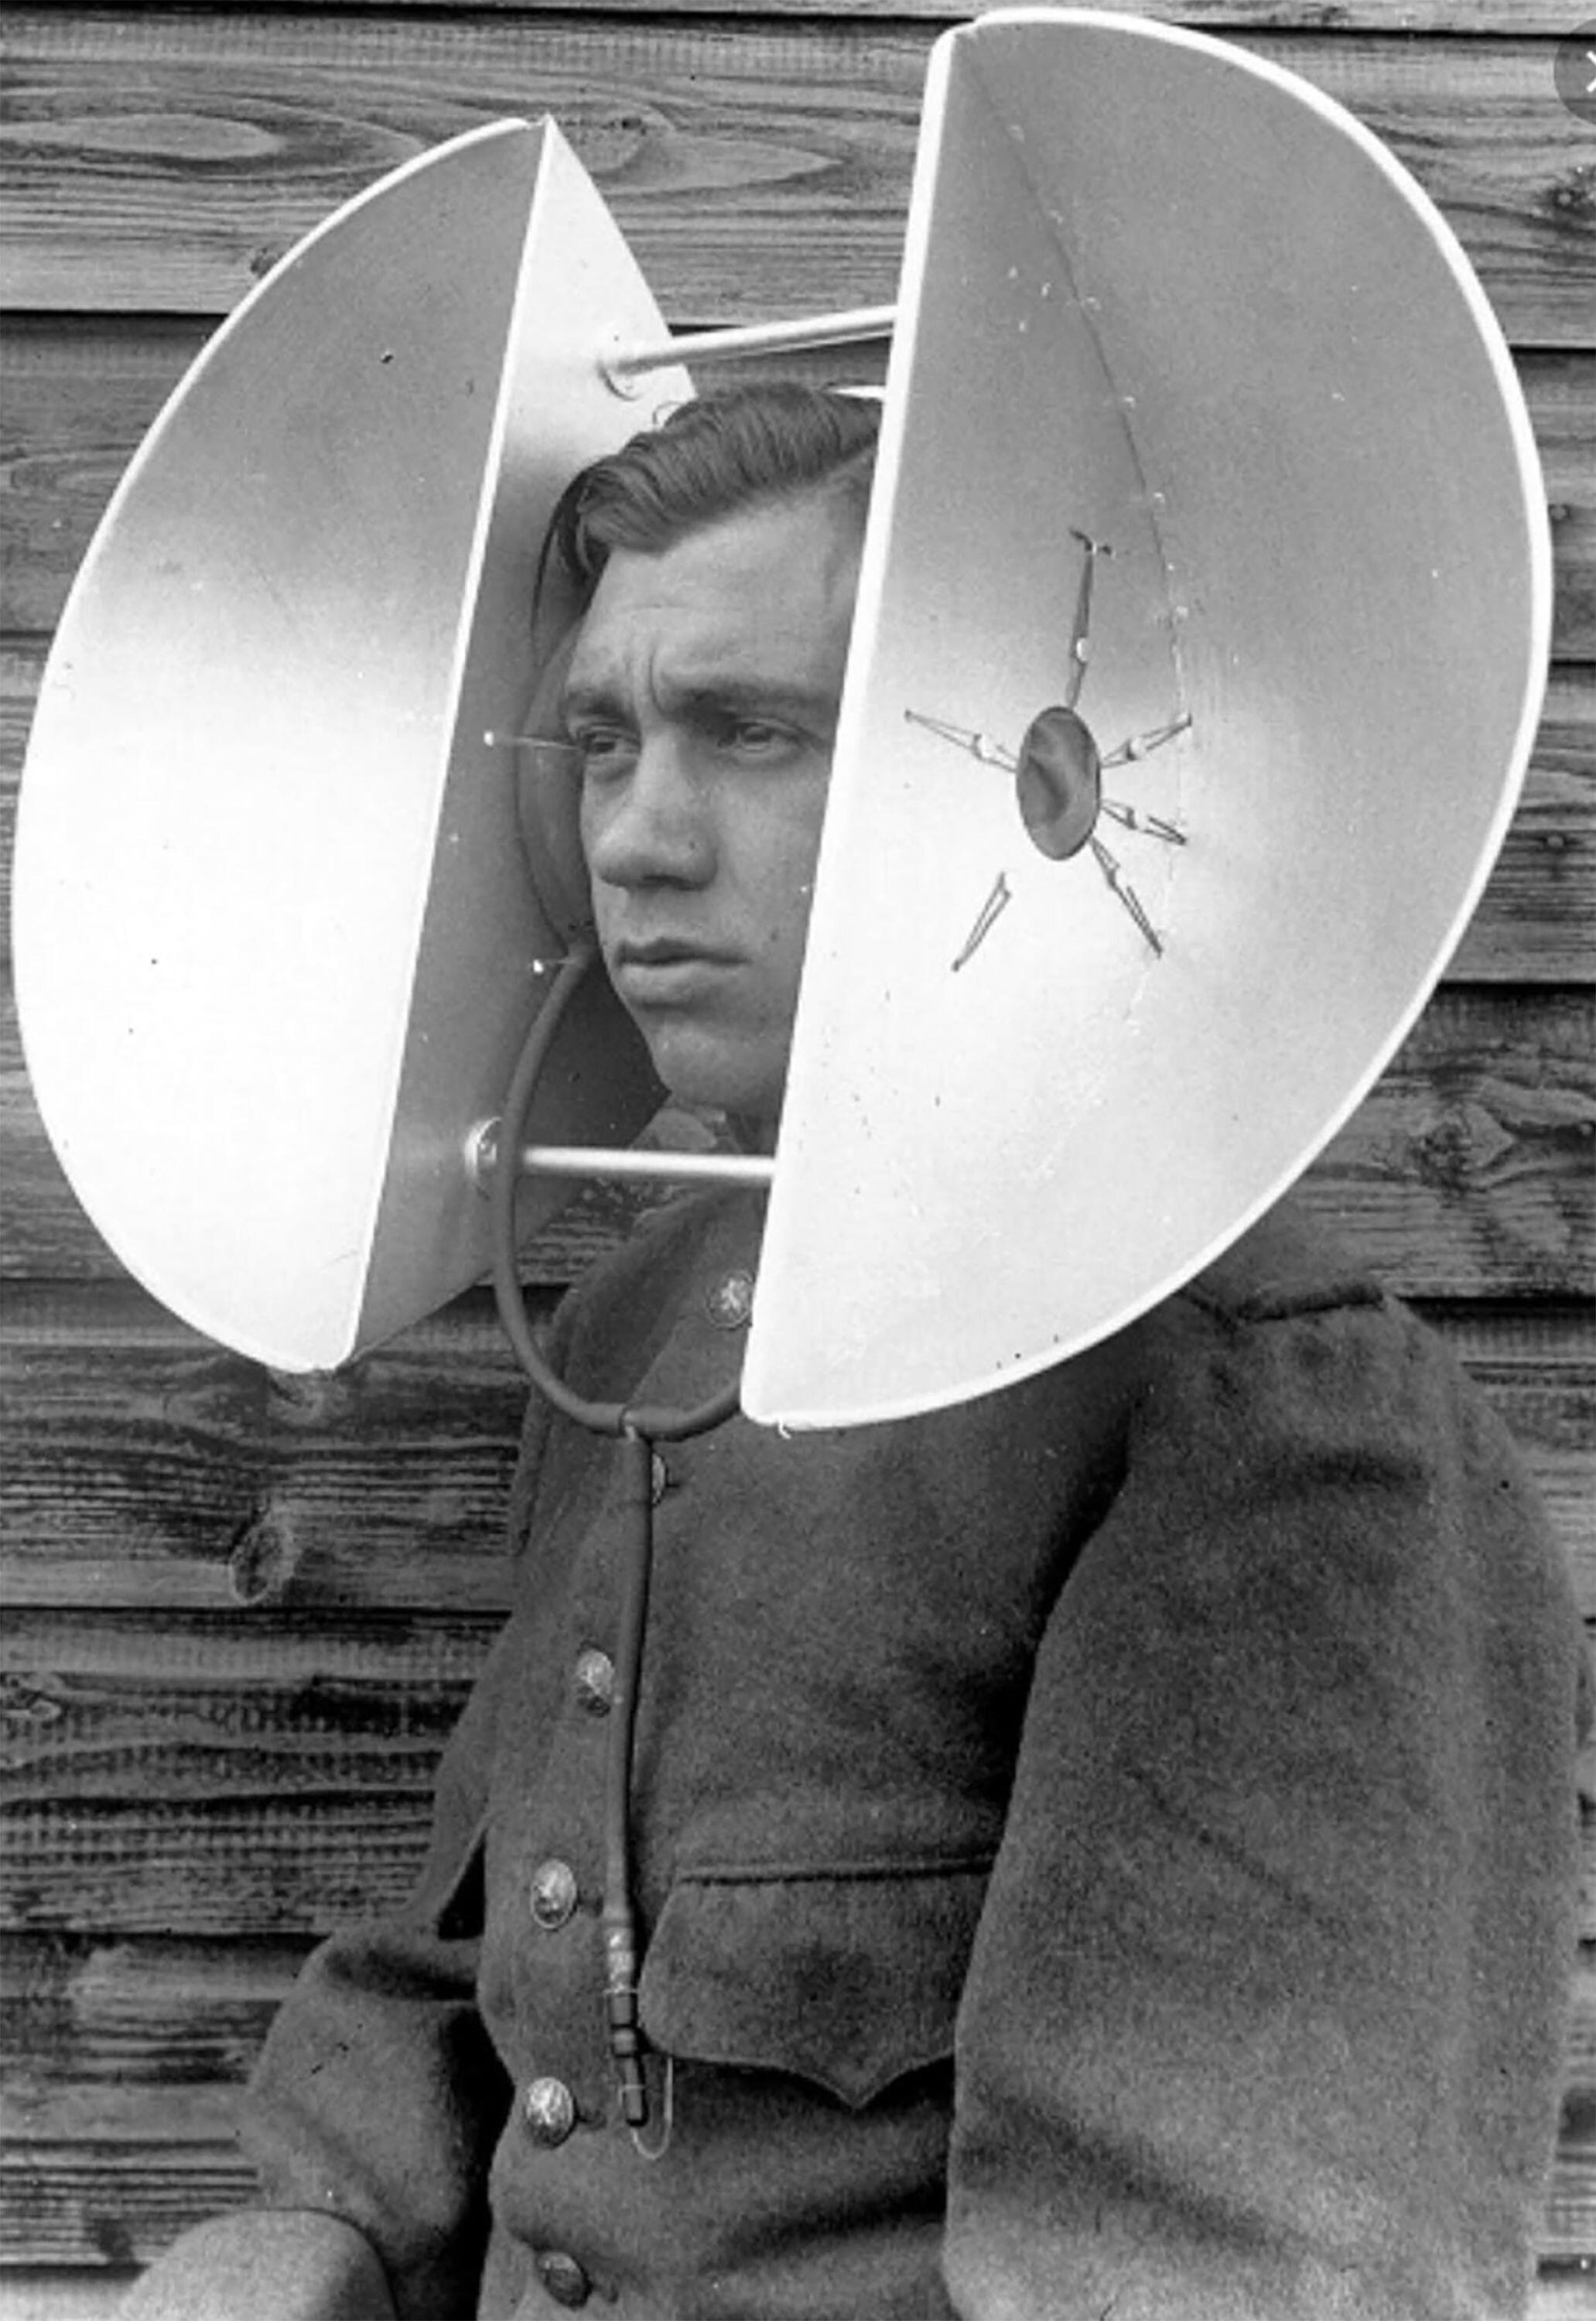 A man with radar devices on the side of his head